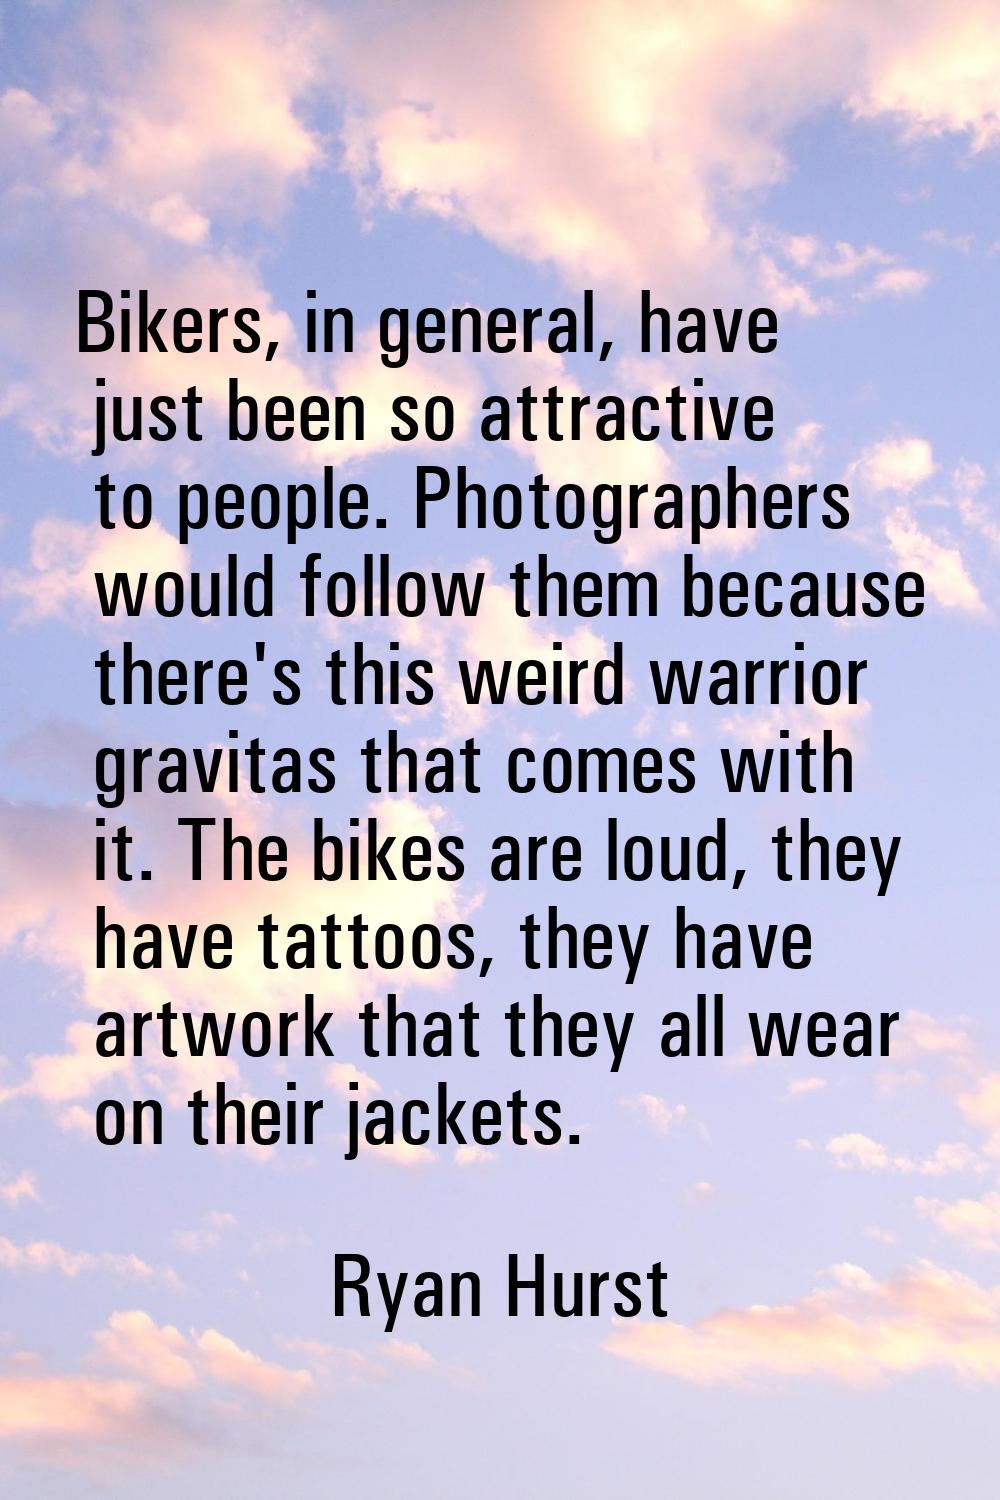 Bikers, in general, have just been so attractive to people. Photographers would follow them because